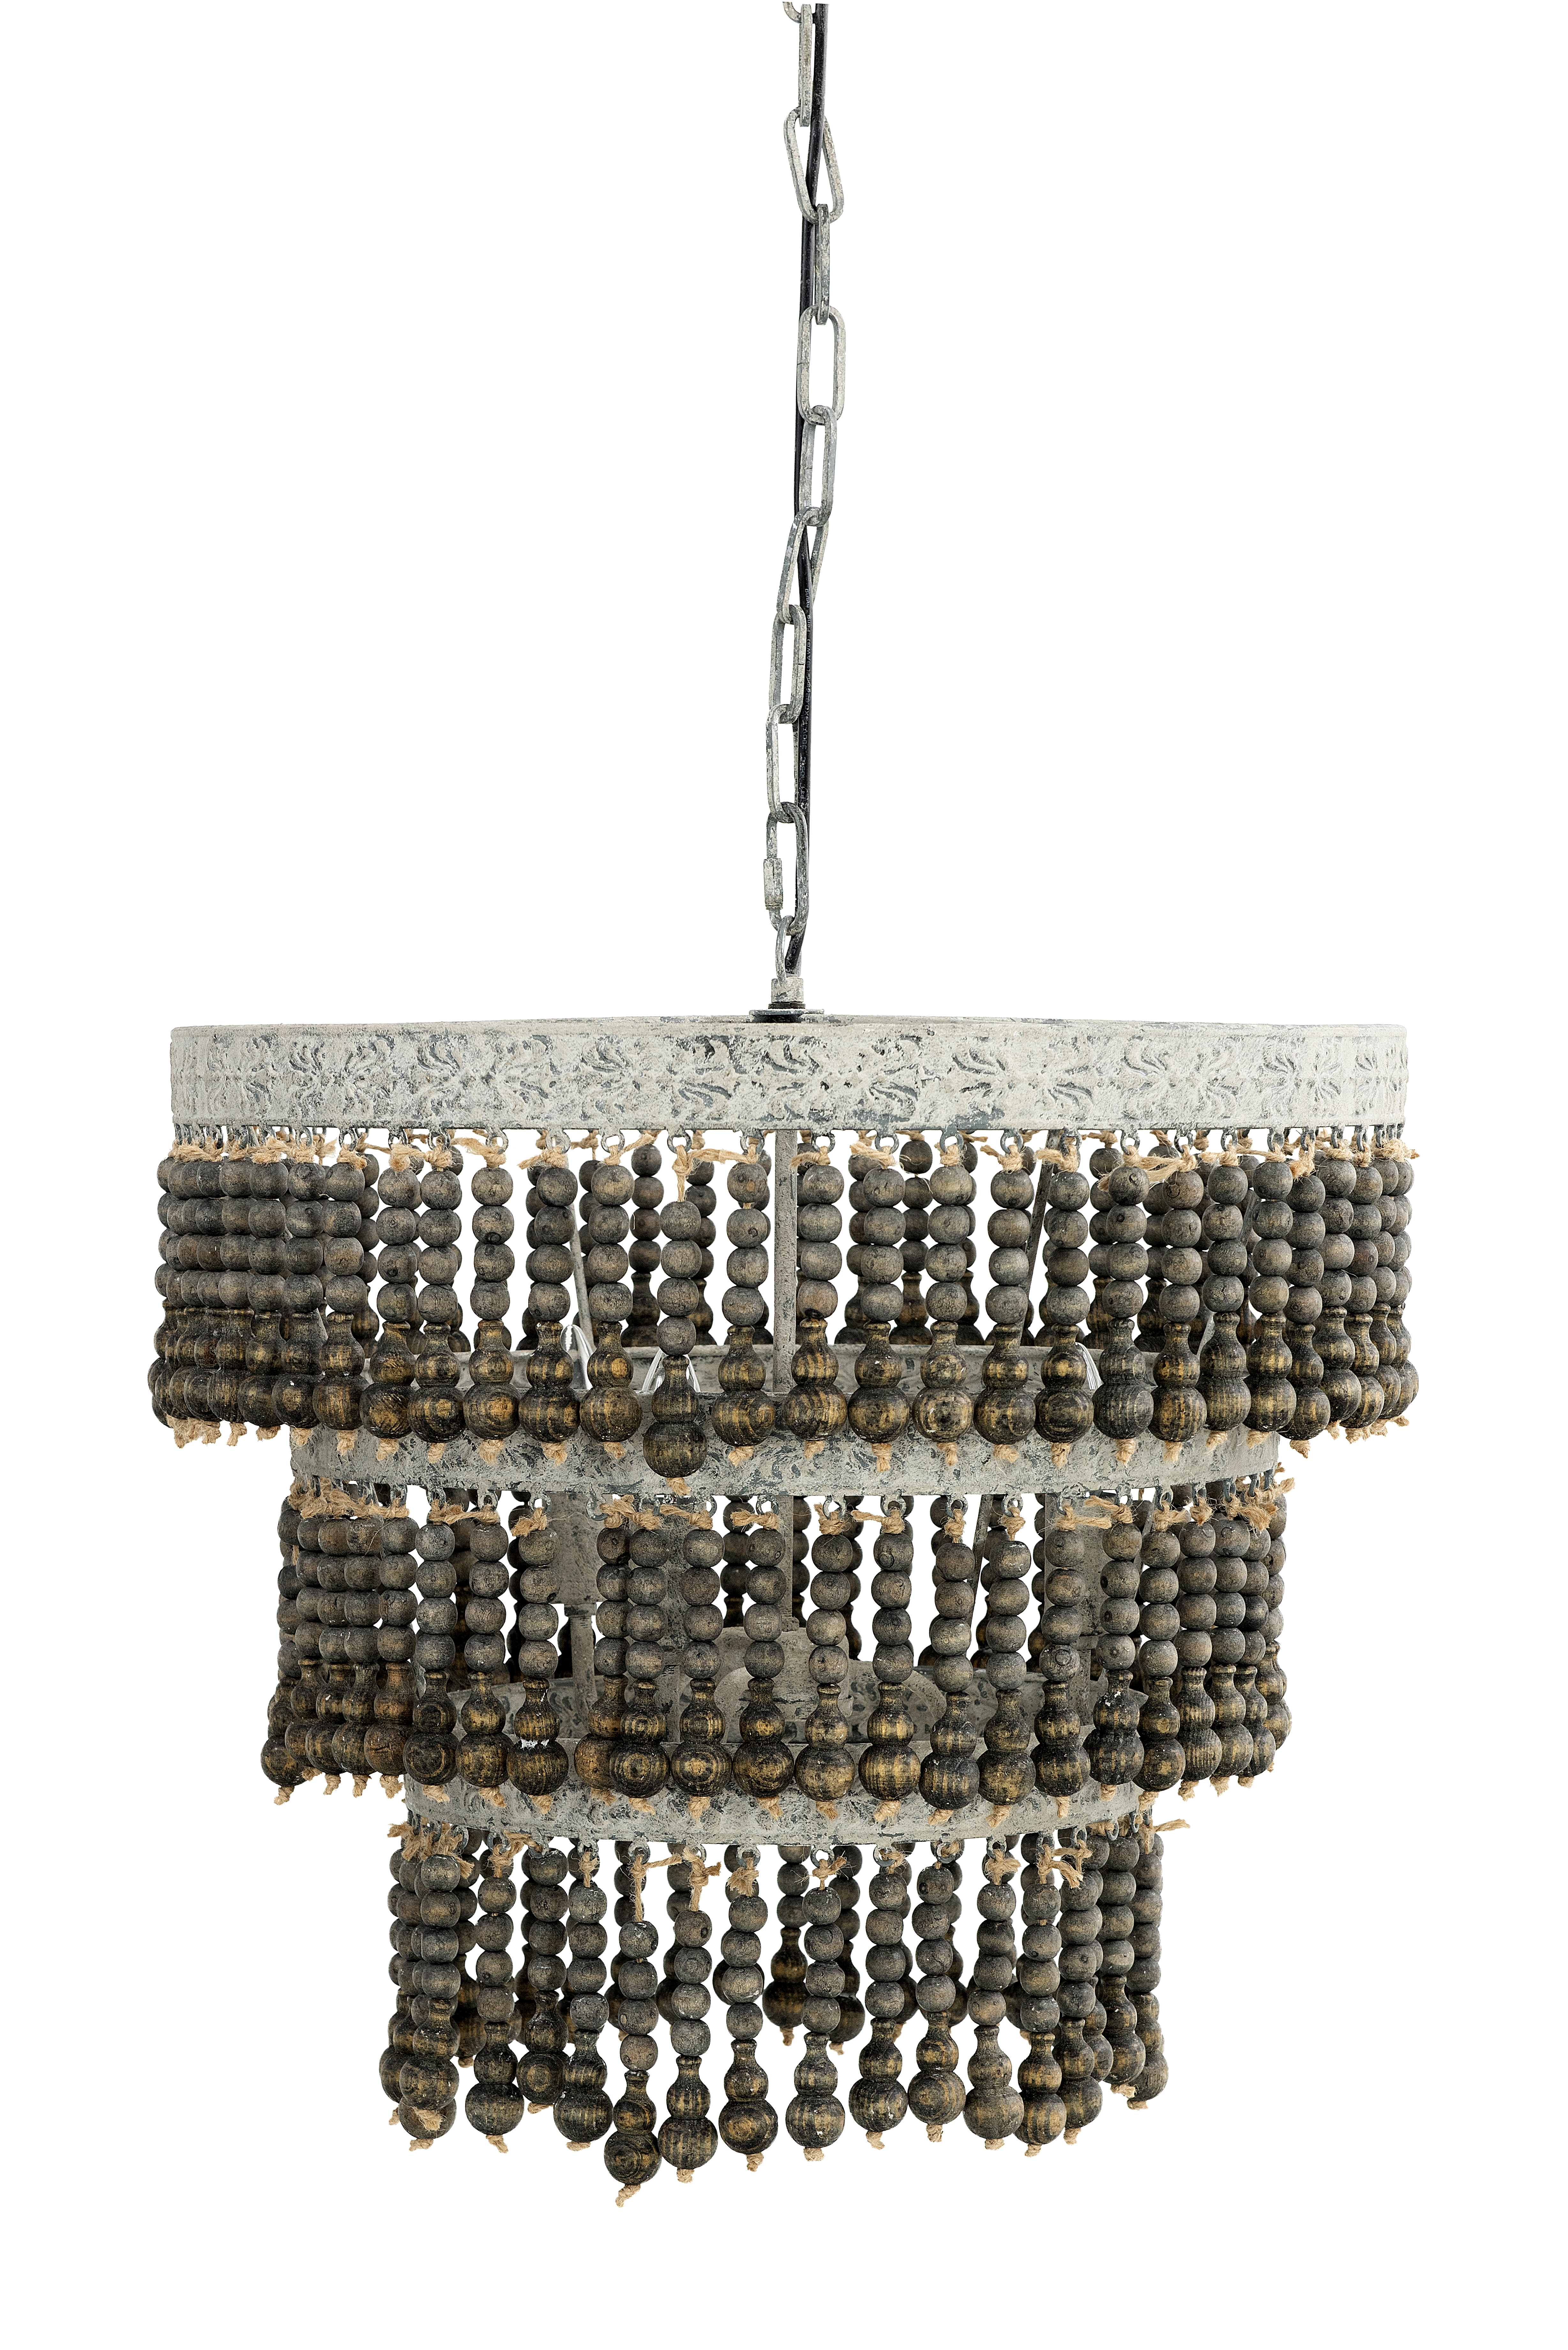 3-Tier Round Metal Chandelier with 3 Lights & Hanging Wood Beads - Image 0